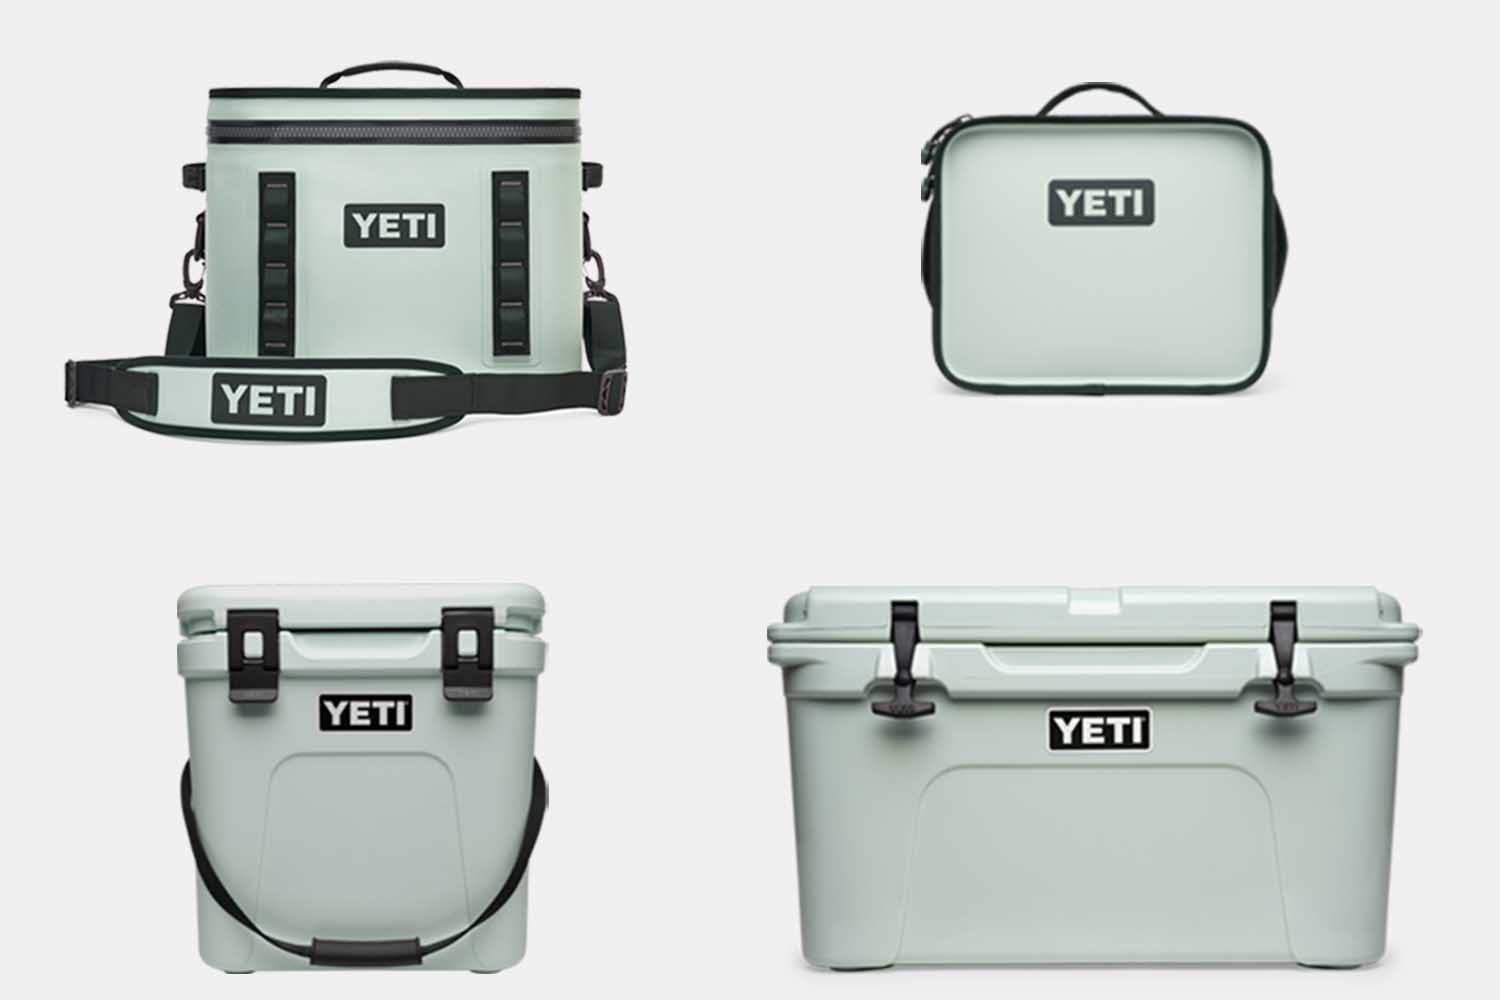 Brooks and Collier - Seafoam Yeti coolers back in stock while they